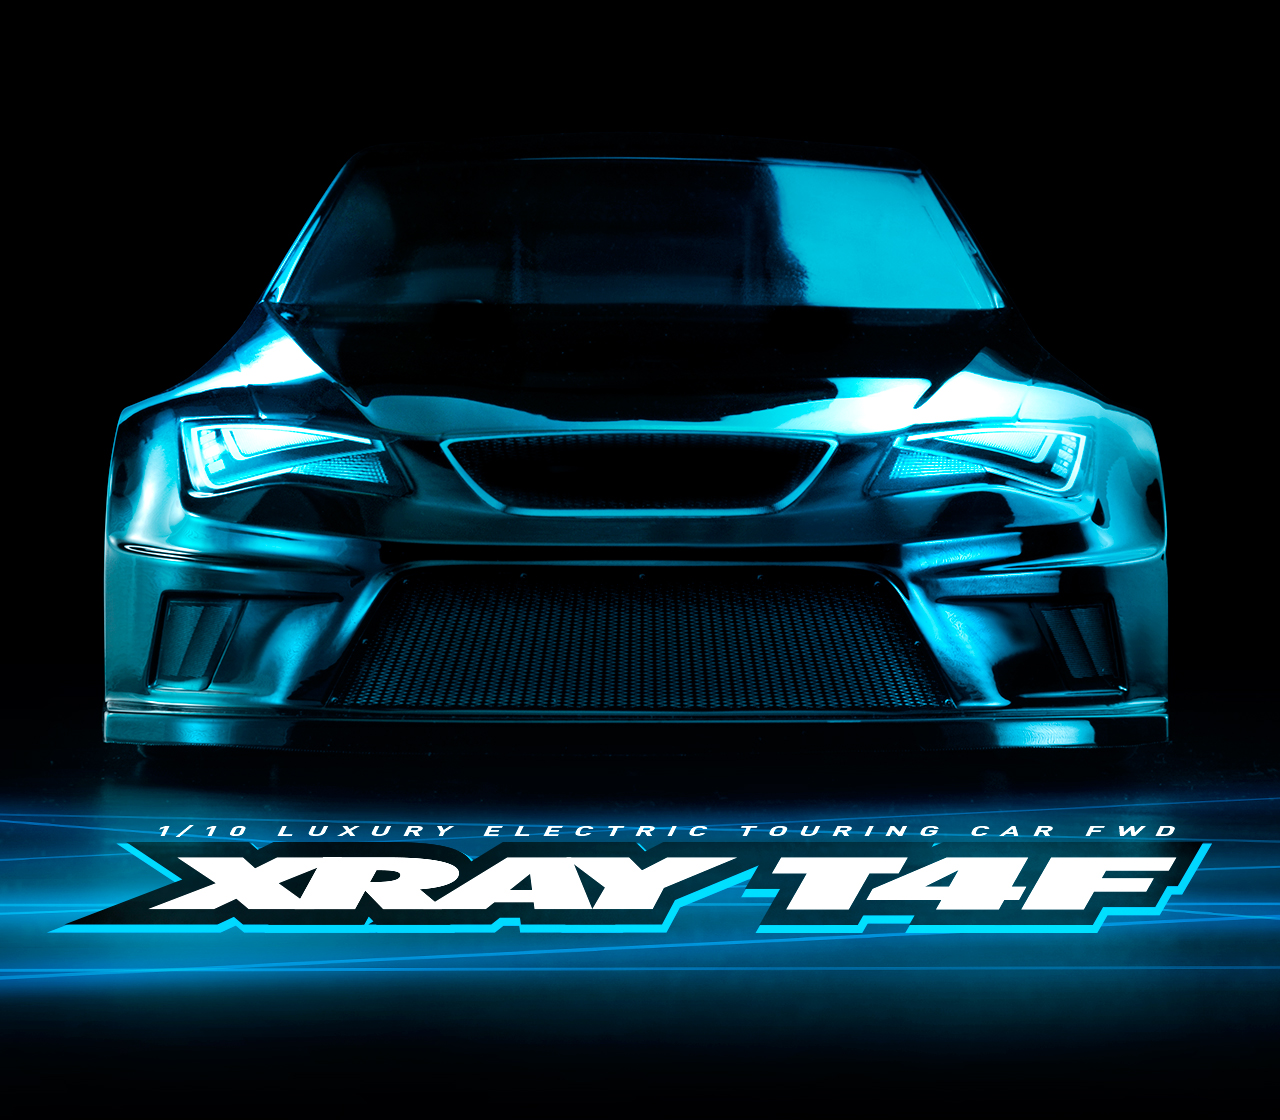 Features | XRAY T4F'21